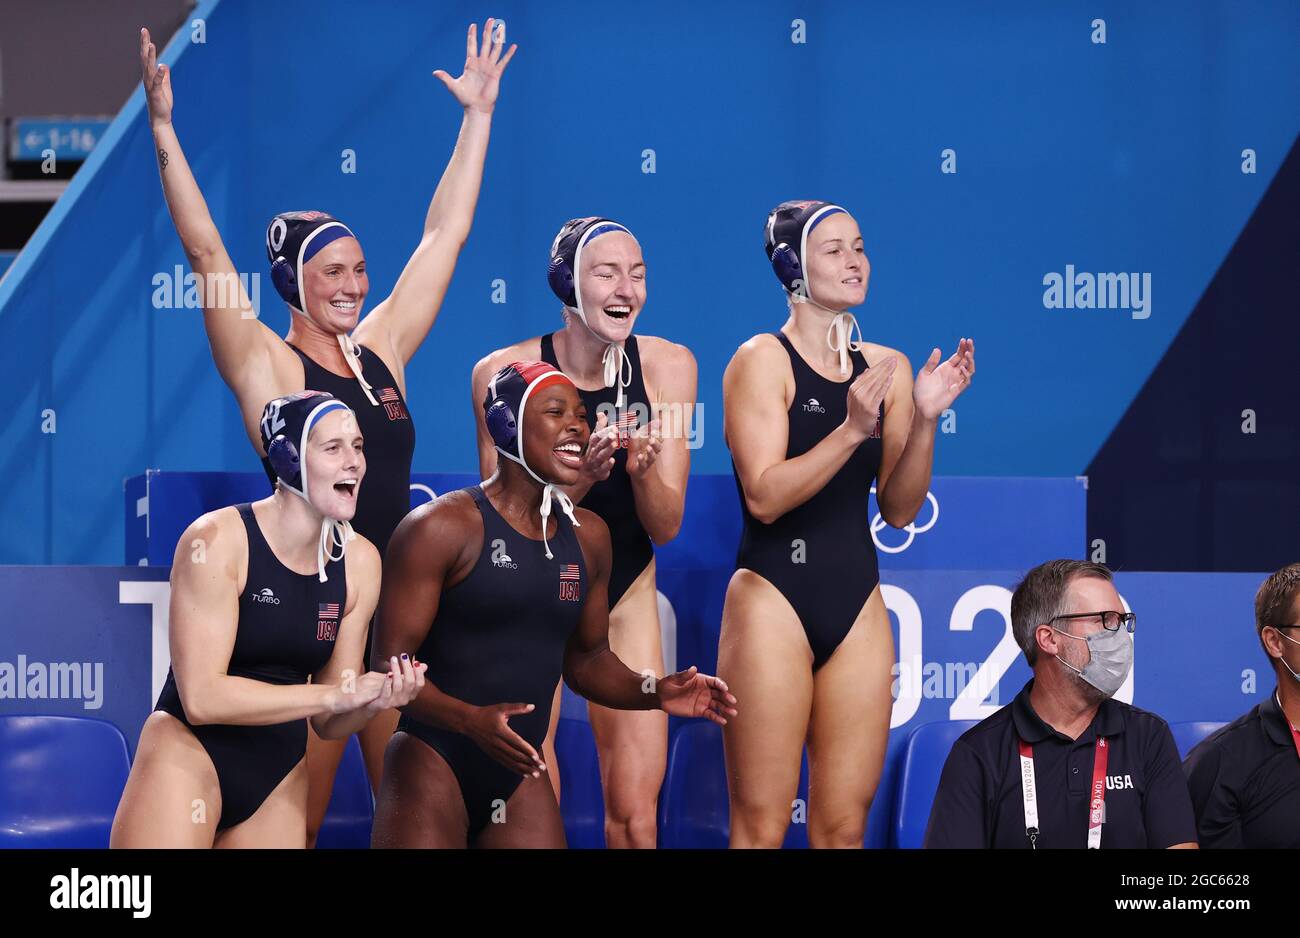 Tokyo 2020 Olympics - Water Polo - Women - Gold medal match - Spain v United States - Tatsumi Water Polo Centre, Tokyo, Japan - August 7, 2021. Alys Williams of the United States, Kaleigh Gilchrist of the United States, Ashleigh Johnson of the United States, Paige Hauschild of the United States and Stephanie Haralabidis of the United States celebrate after winning gold REUTERS/Gonzalo Fuentes Stock Photo